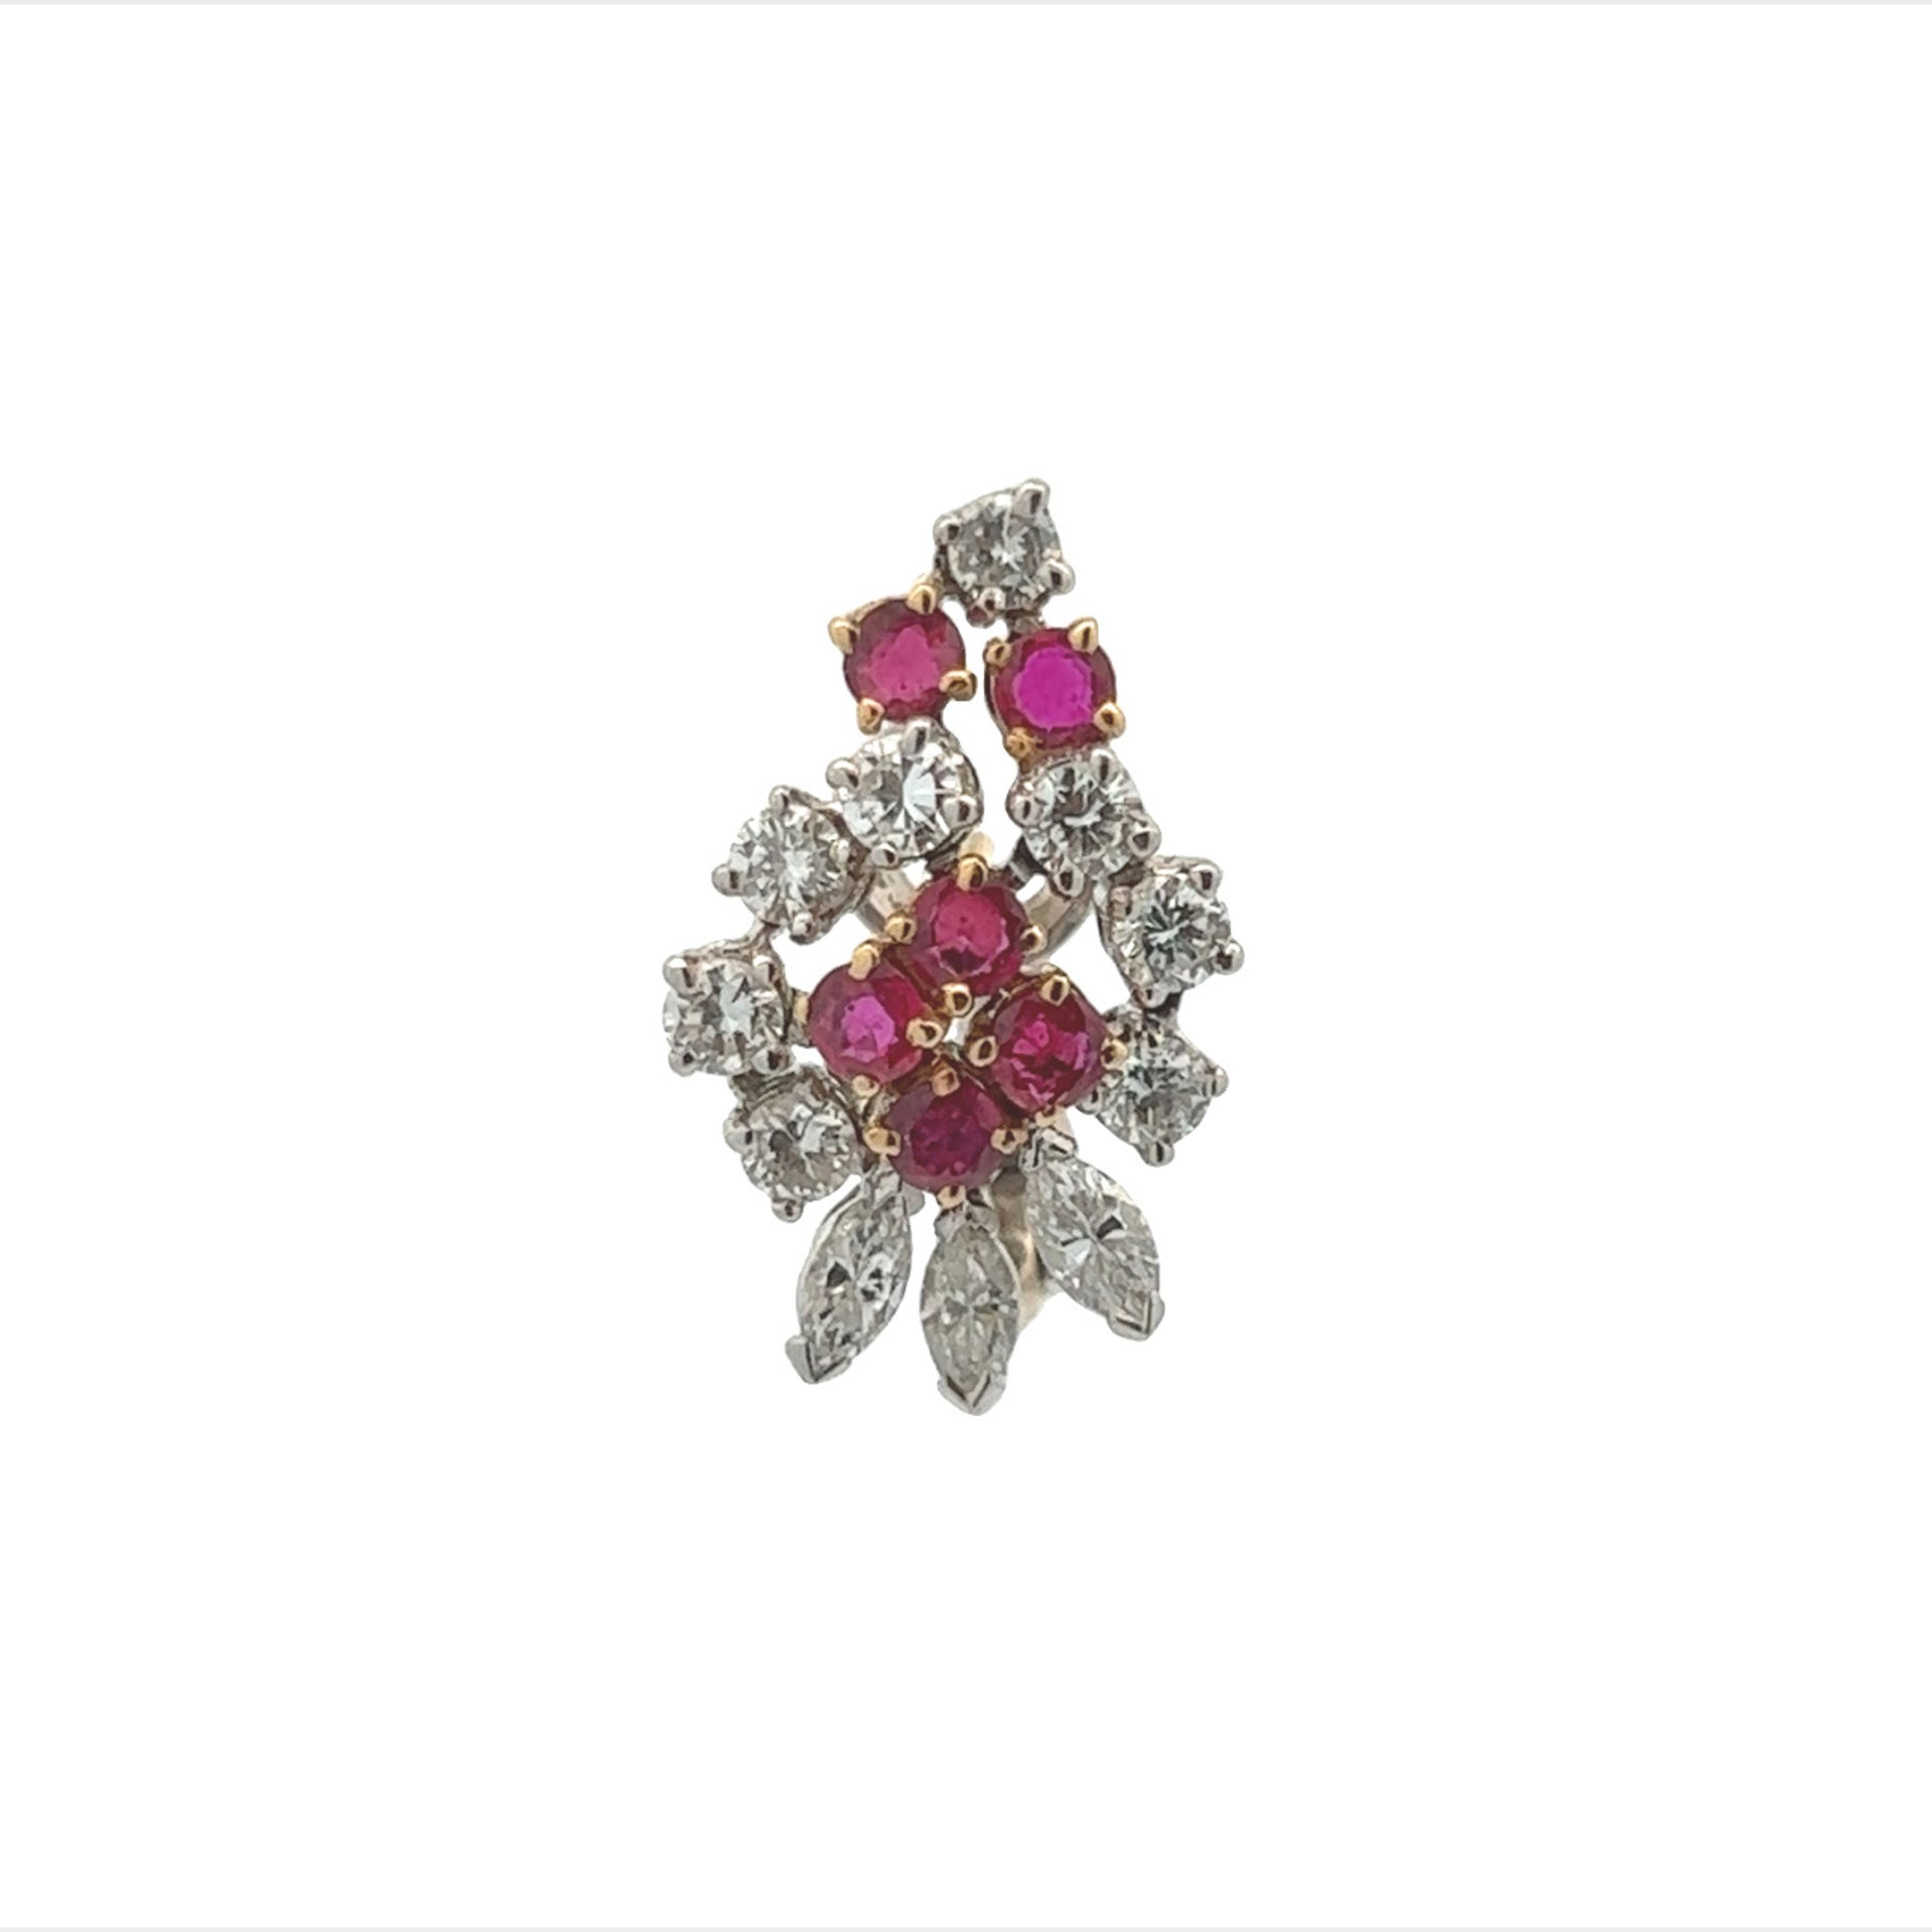 French 1970s Platinum Diamond & Ruby Earrings front